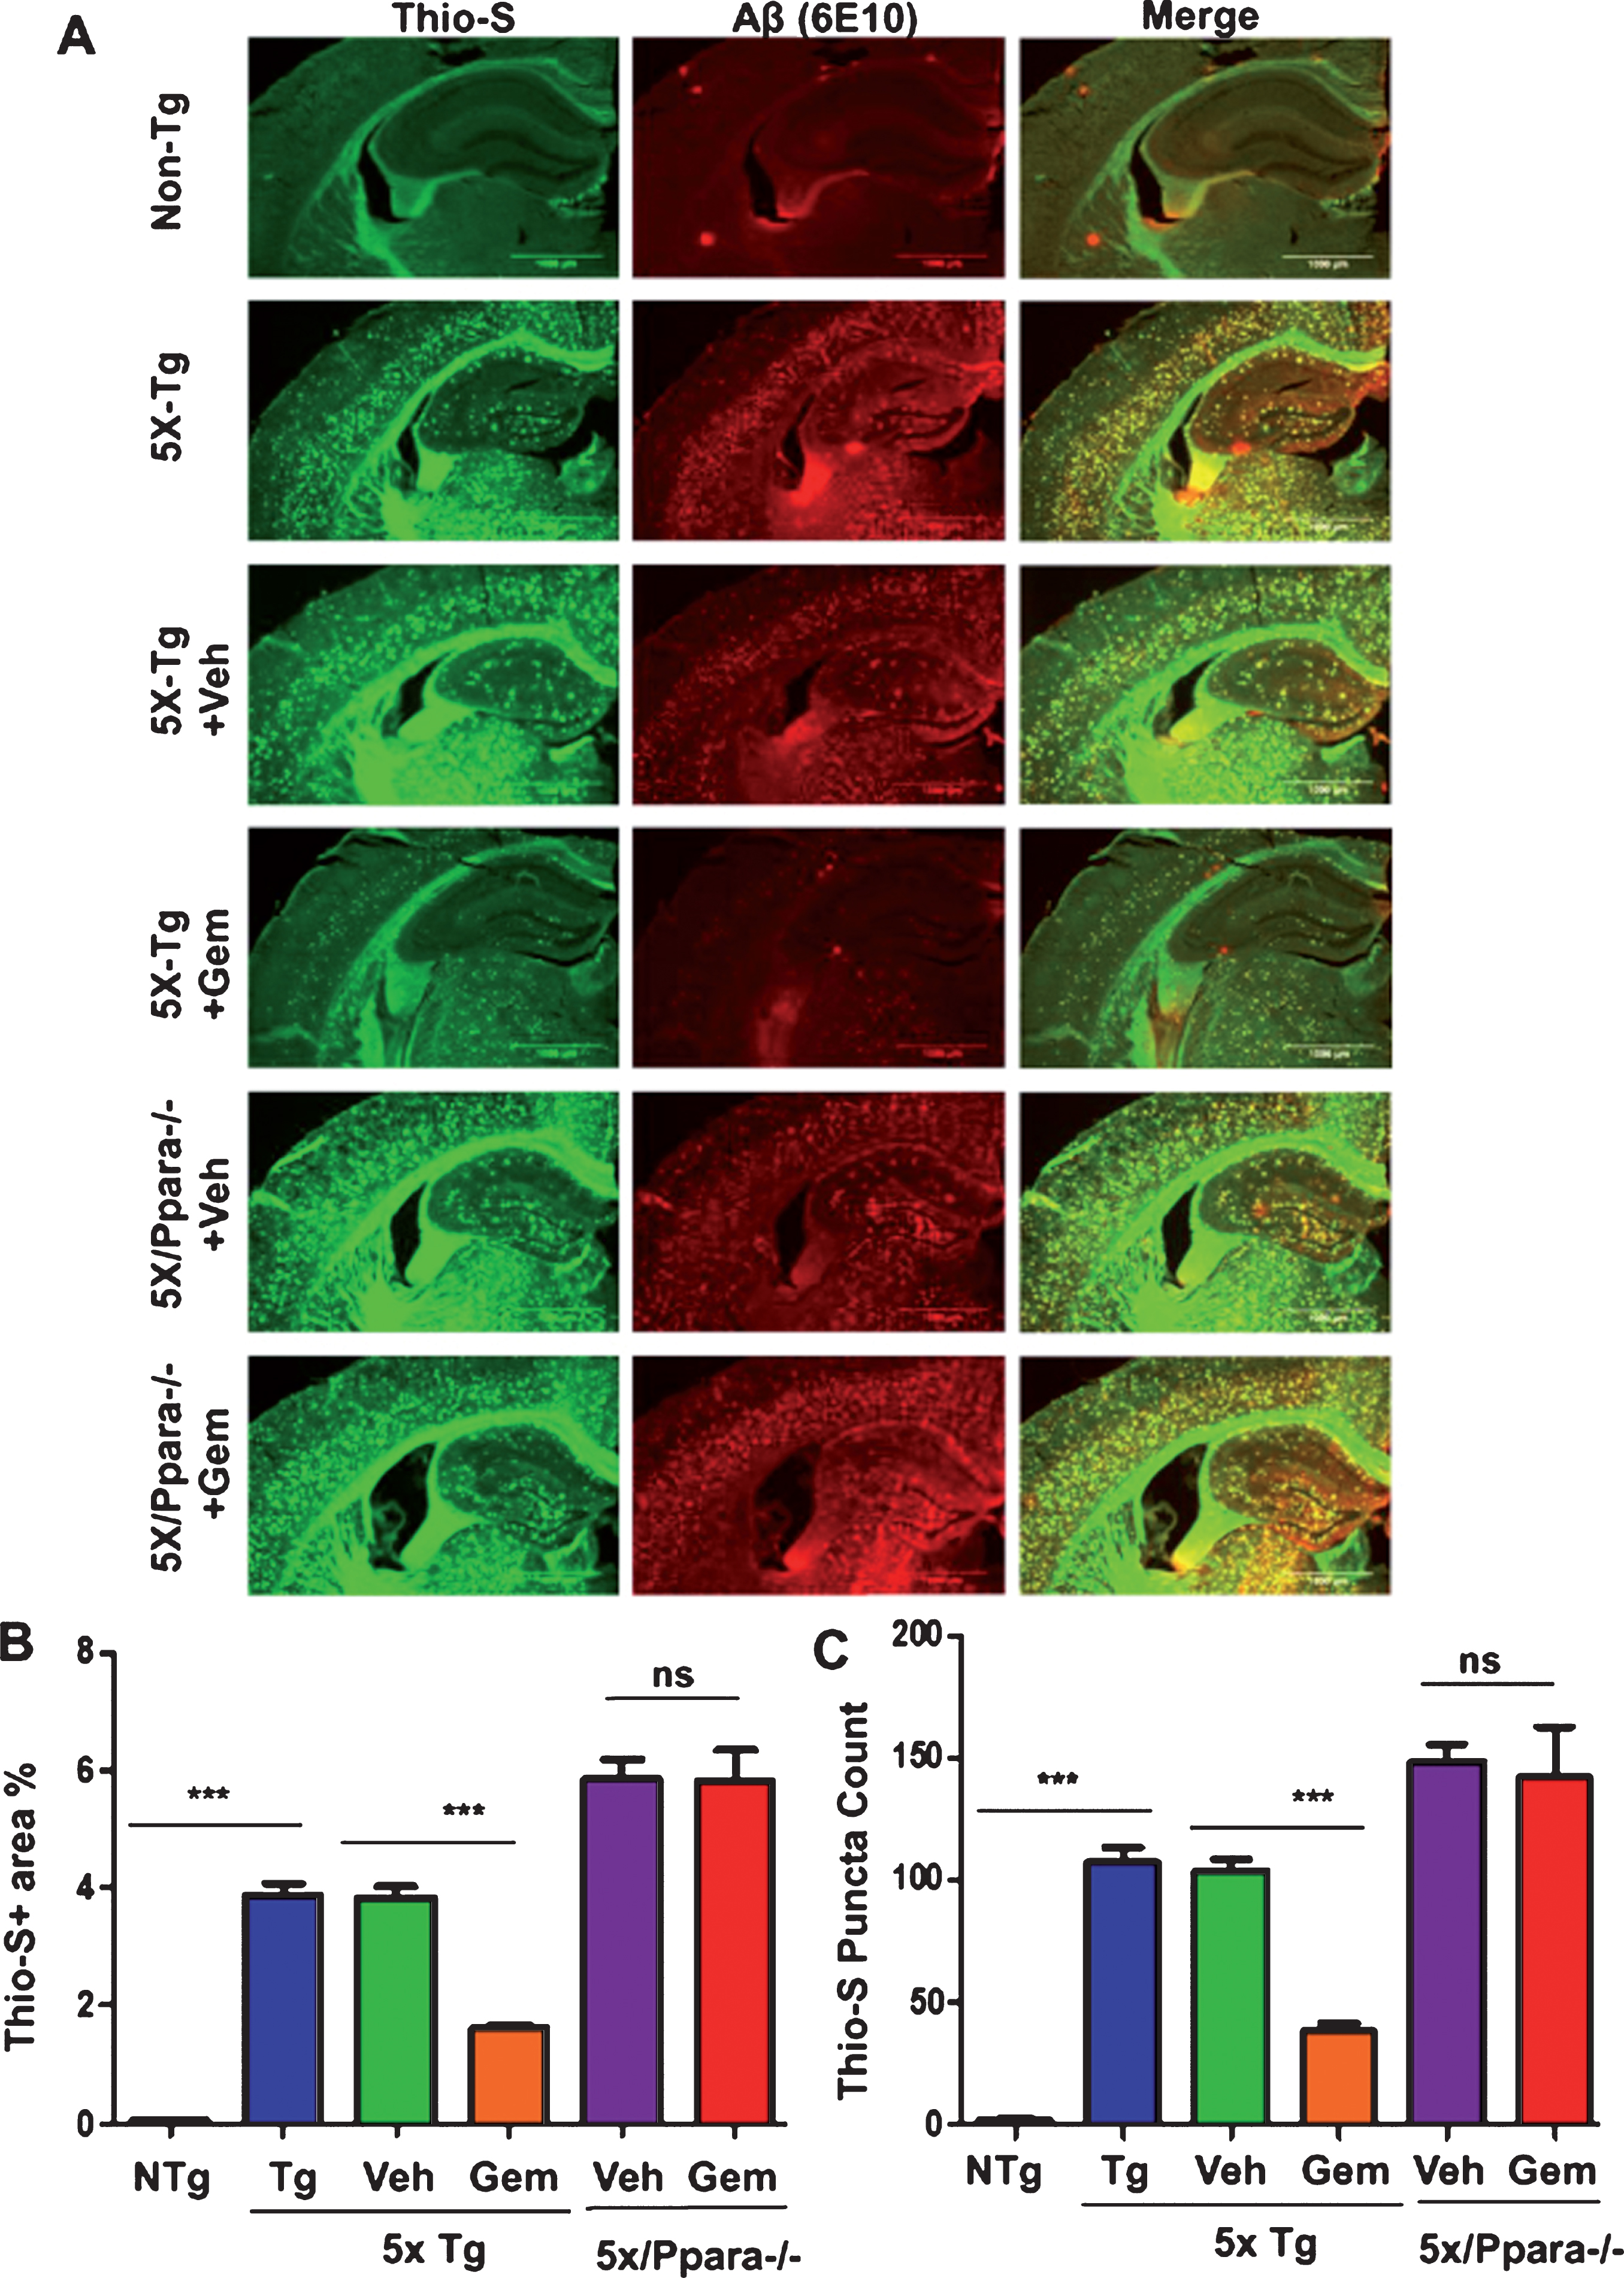 Gemfibrozil attenuates hippocampal amyloid pathology in a PPARα-dependent manner. Six month old 5XFAD (n = 6) and 5XFAD/PPARa–/– mice (n = 5) were treated with gemfibrozil (7.5 mg/kg/day) or vehicle (0.1% methylcellulose) for 1 month followed by (A) double labeling of free floating hippocampal sections with thioflavin-S (Green) and 6E10 antibody (Red). Scale bar = 1000μm. Characterization of plaques by analyzing (B) Thio-S puncta count and (C) Thio-S positive area percentage. All data are represented as mean±SEM. One way ANOVA followed by Tukey’s multiple comparison test was used for statistical analysis;  *p <  0.05,  **p <  0.01,  ***p <  0.001.